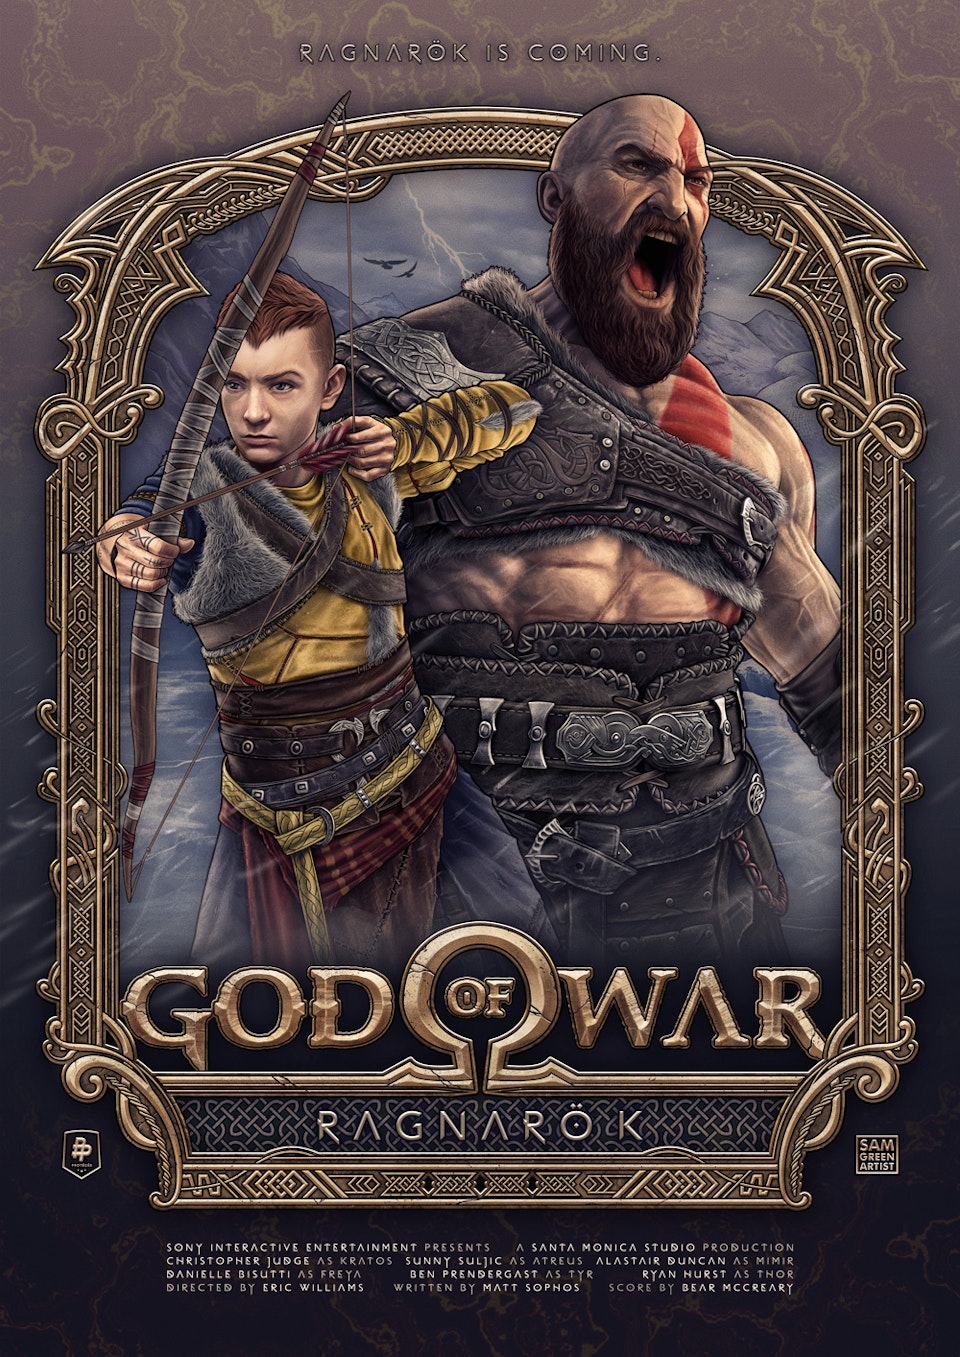 God of War Ragnarok - God of War Ragnarok poster illustration.

I was invited to take part in the Poster Posse's #Hate2Wait art project, creating artwork for our most anticipated media. I chose the game God of War Ragnarok for my subject. The follow up to 2018's God of War, one of my all time favourite games.

For the design I wanted to focus primarily on Kratos and his son Atreus, the real core of the games. Around them is an ornate and detailed Norse style frame which I designed.

Painting in Procreate on iPad Pro. Frame designed in Adobe Illustrator, painted in Procreate. Assembly in Adobe Photoshop.